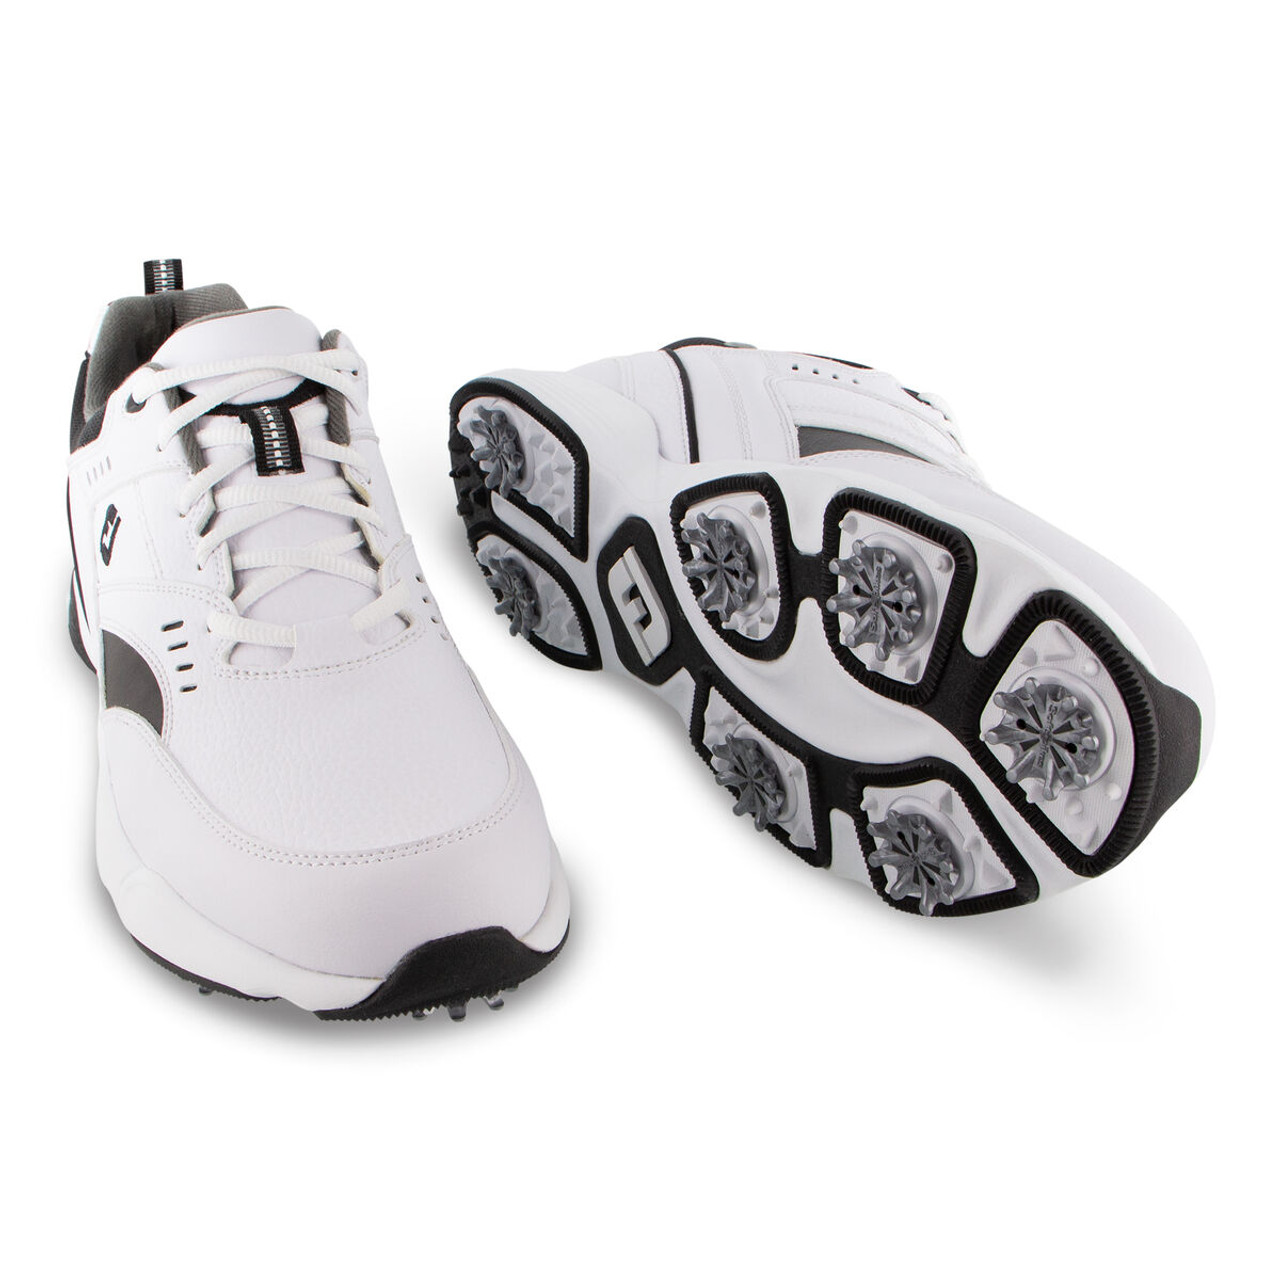 FootJoy Specialty Golf Shoes (White 